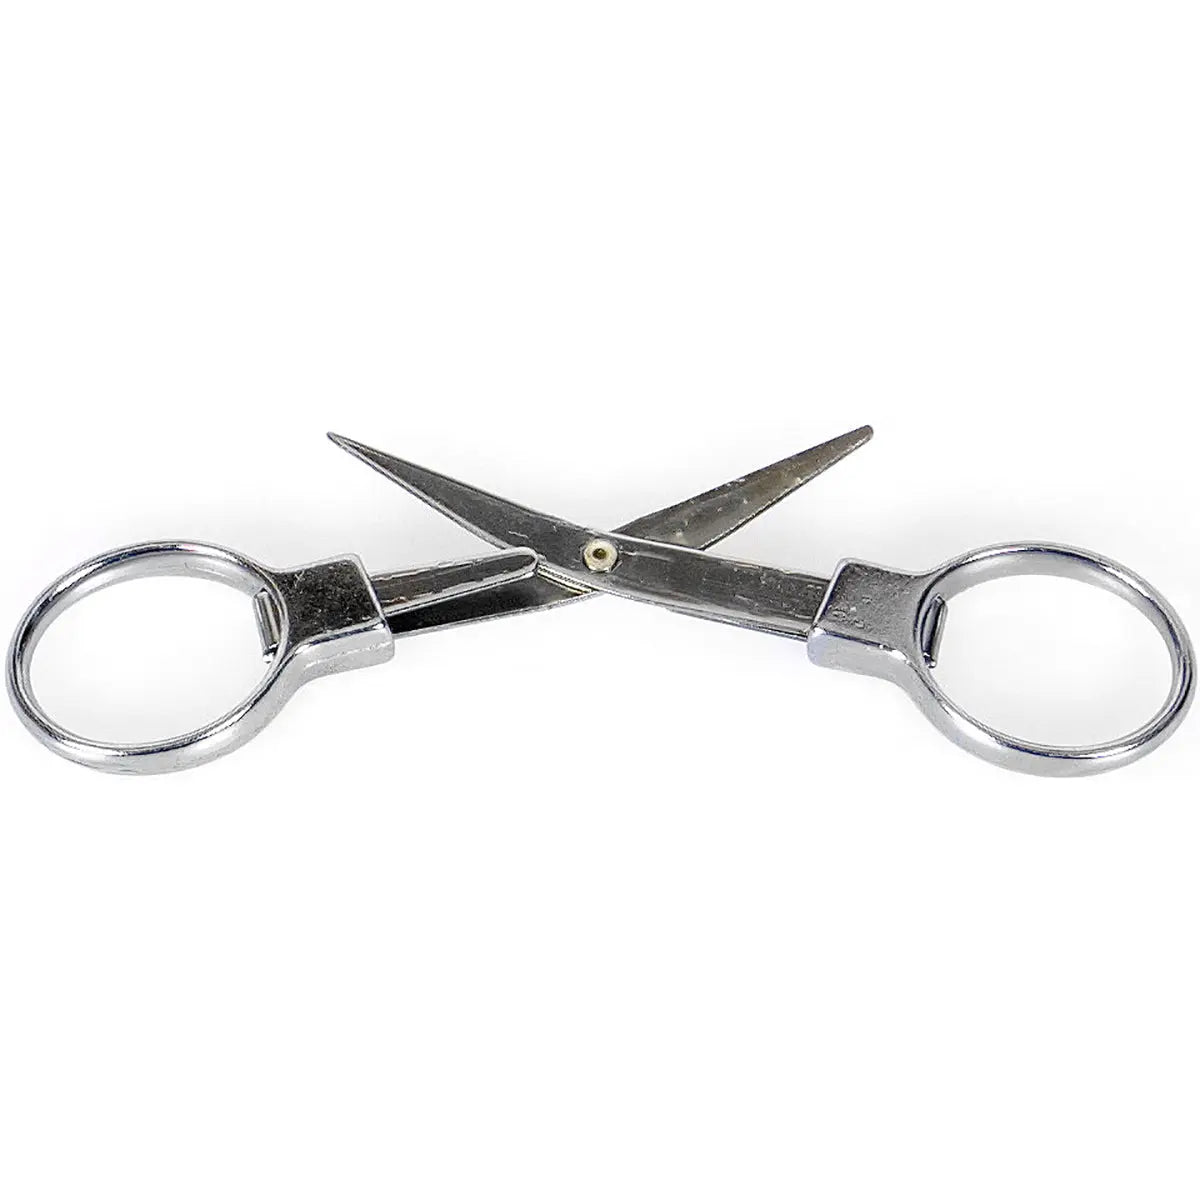 Coghlan's Folding Scissors, Store Safely in Pocket, Purse for Camping, Fishing Coghlan's